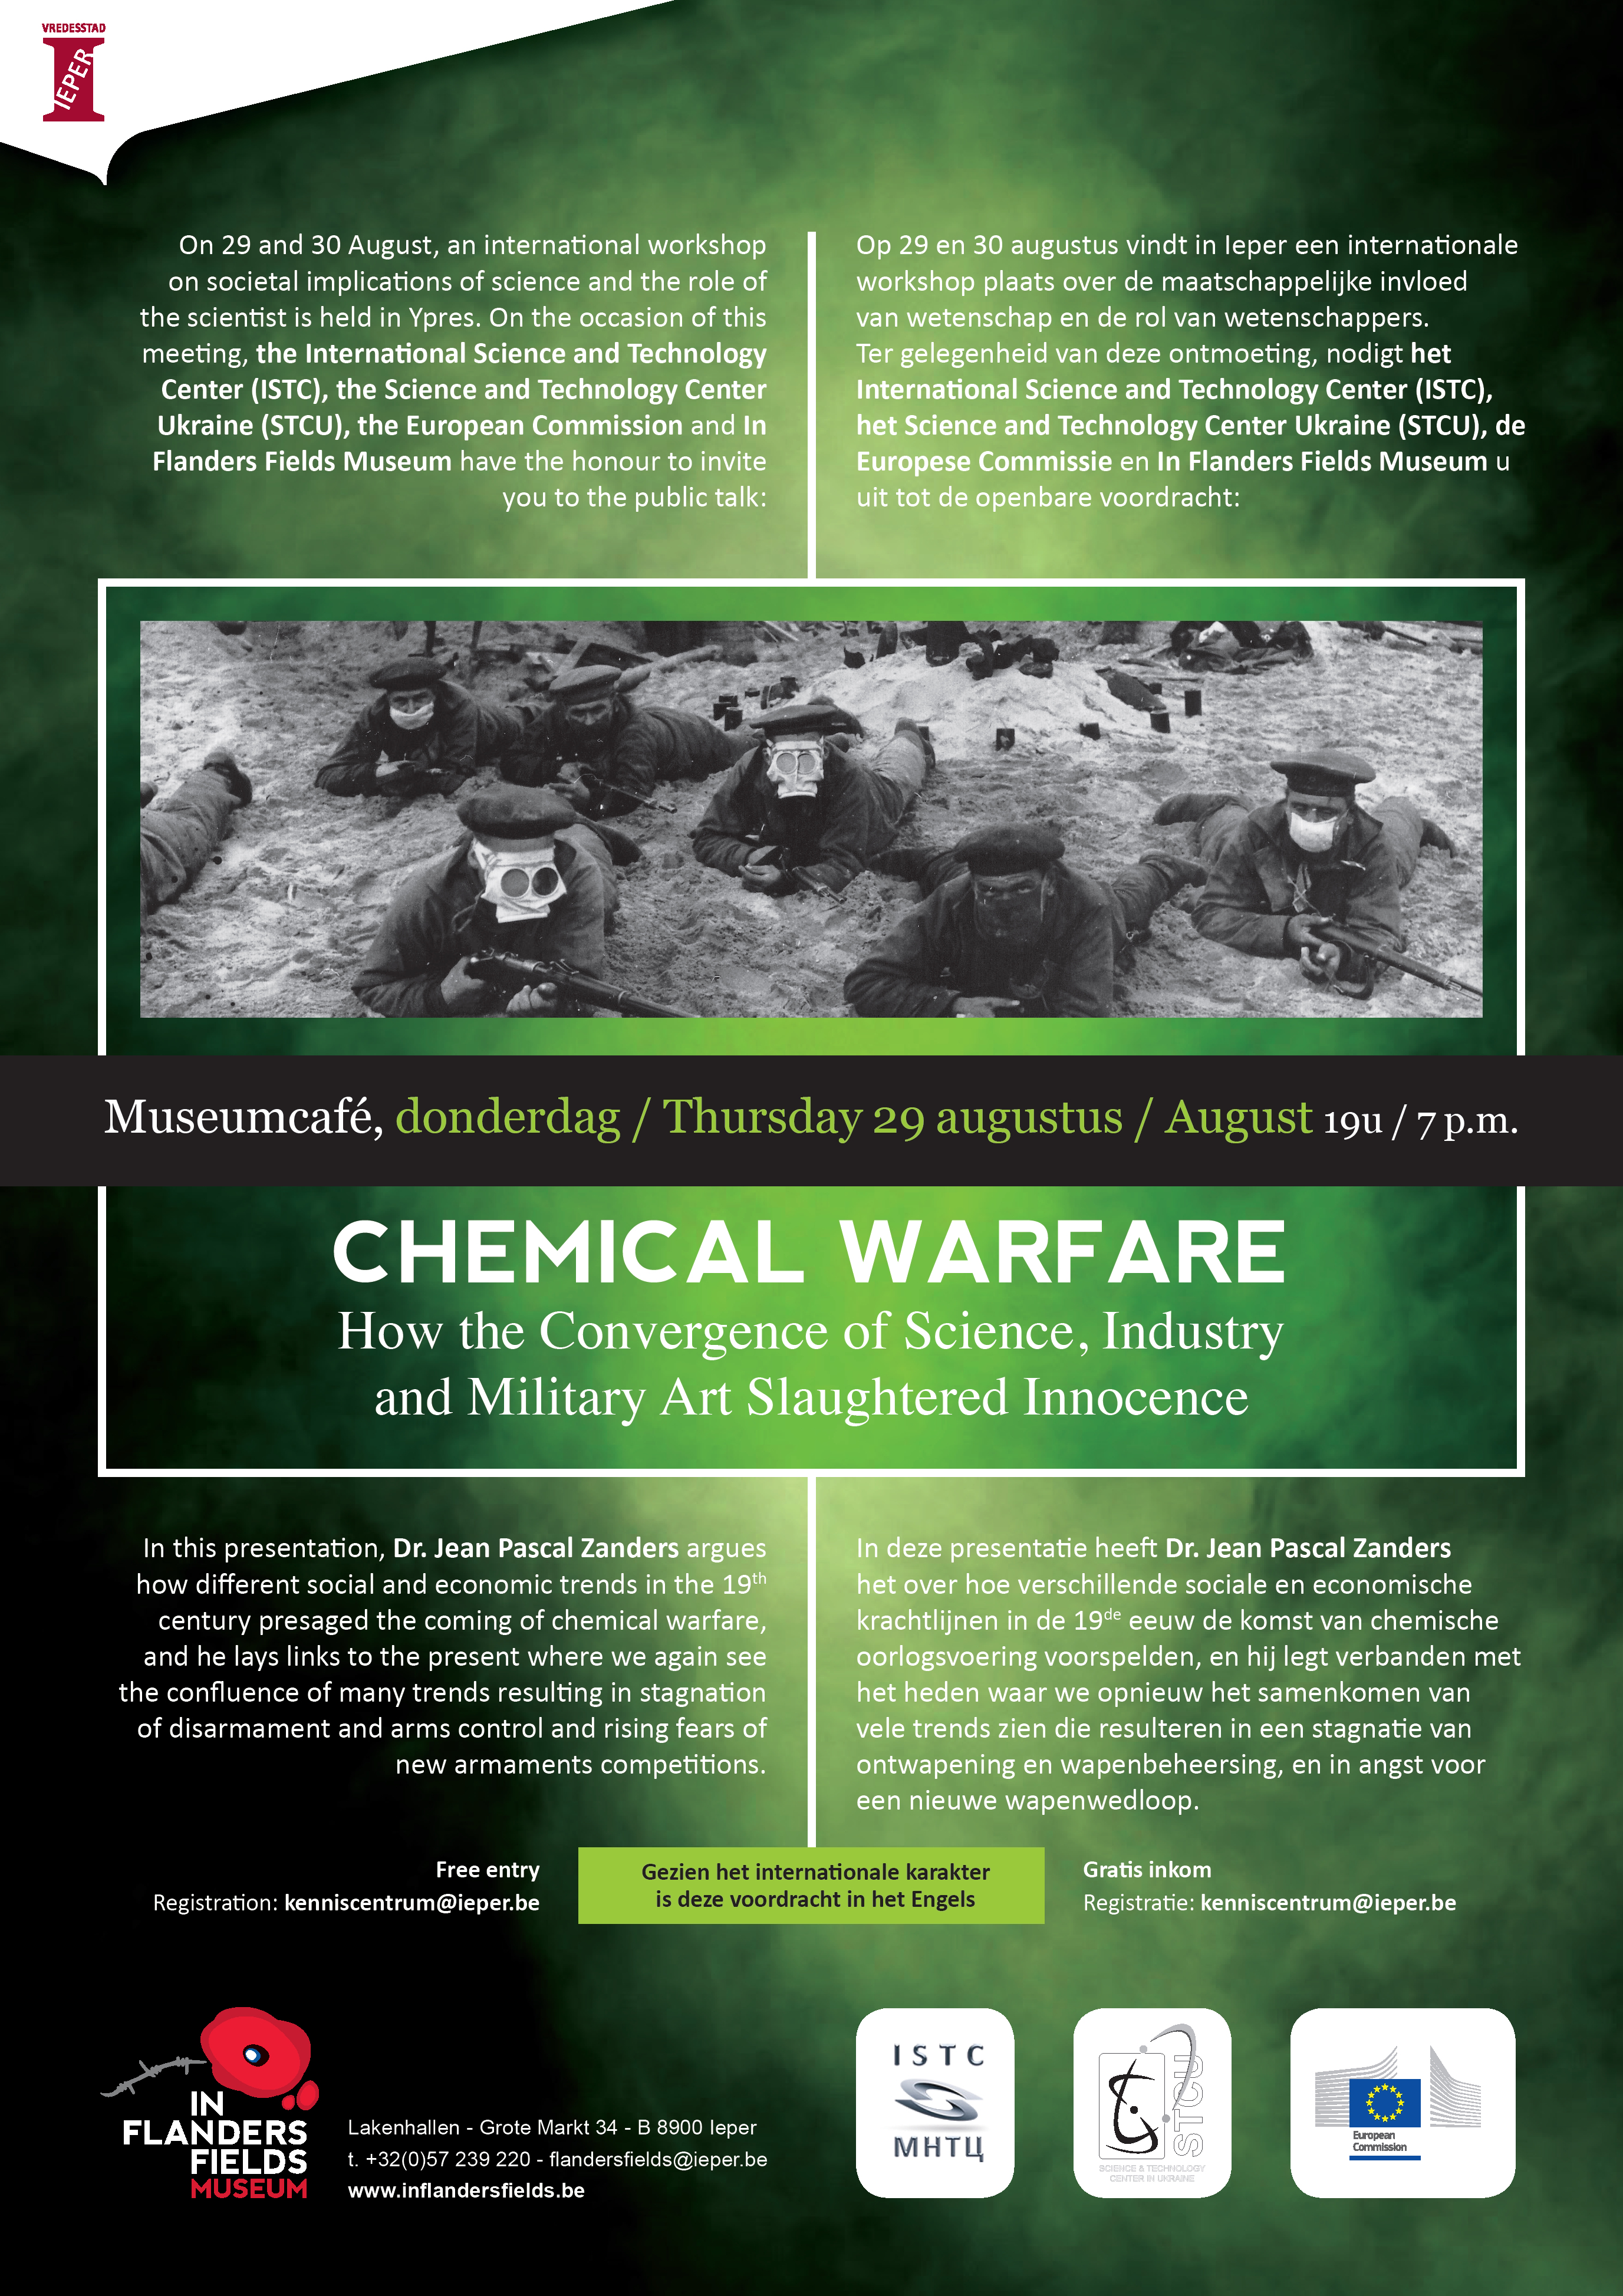 Chemical warfare | The Trench